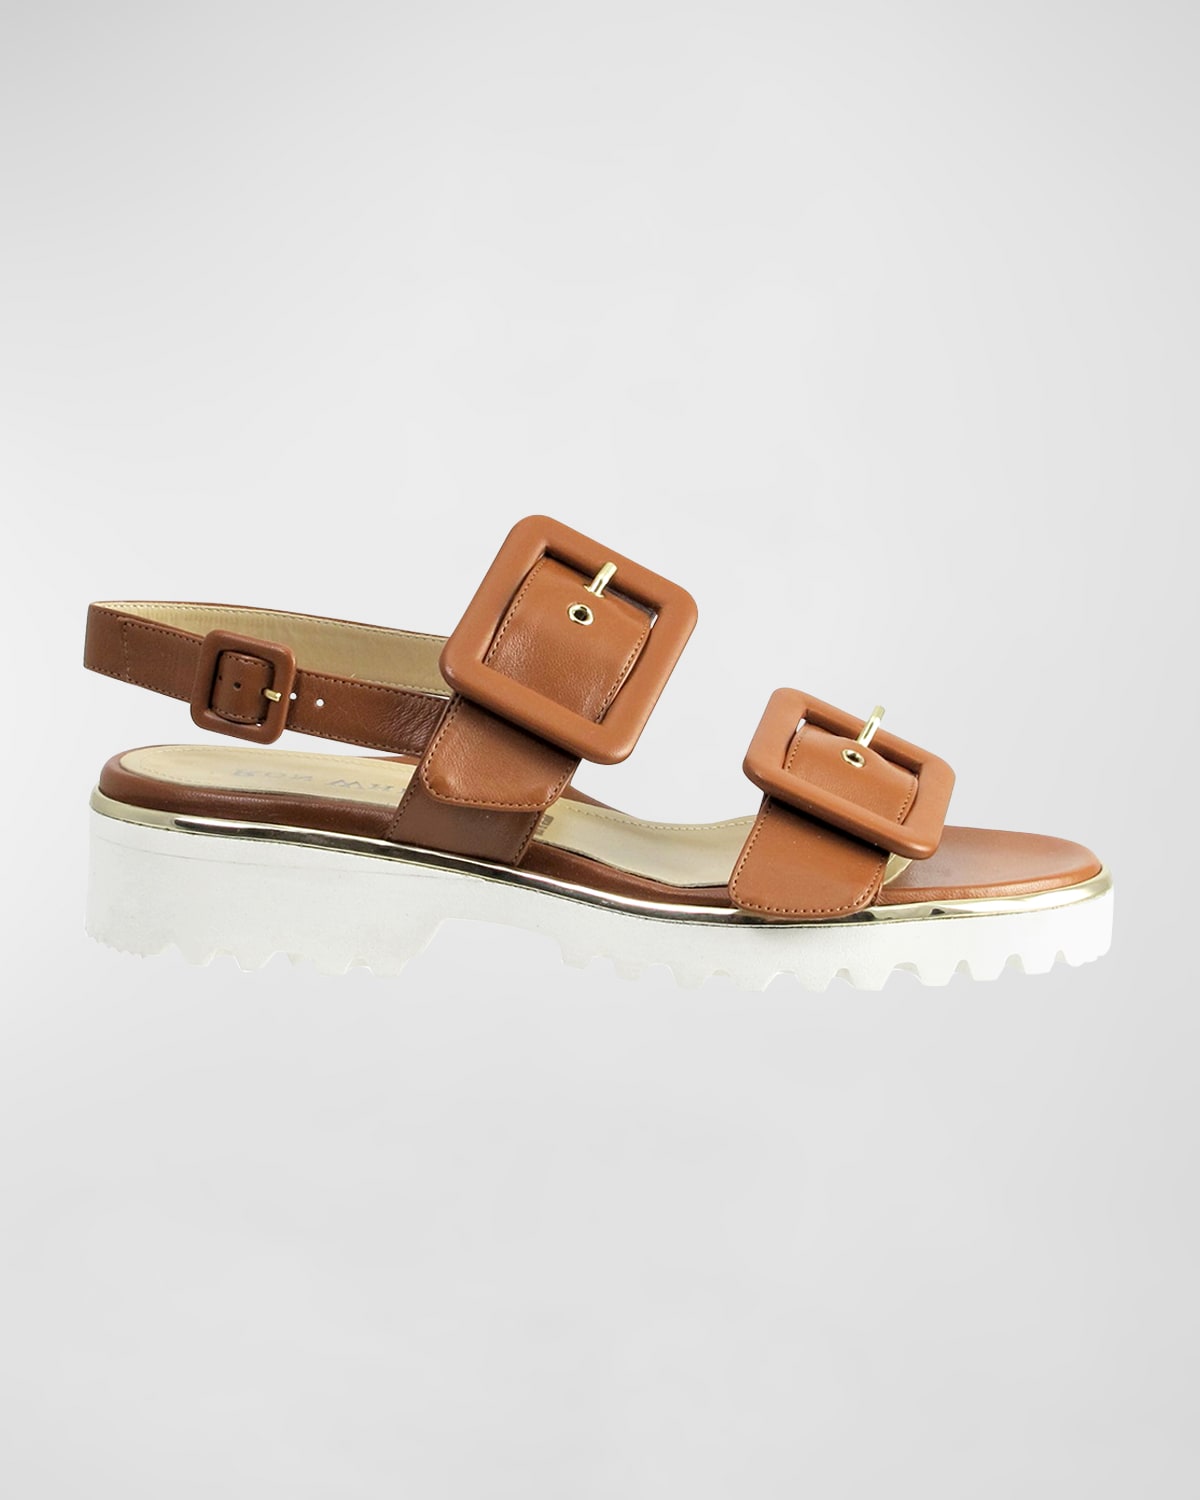 Callie Buckle Leather Ankle-Strap Sandals